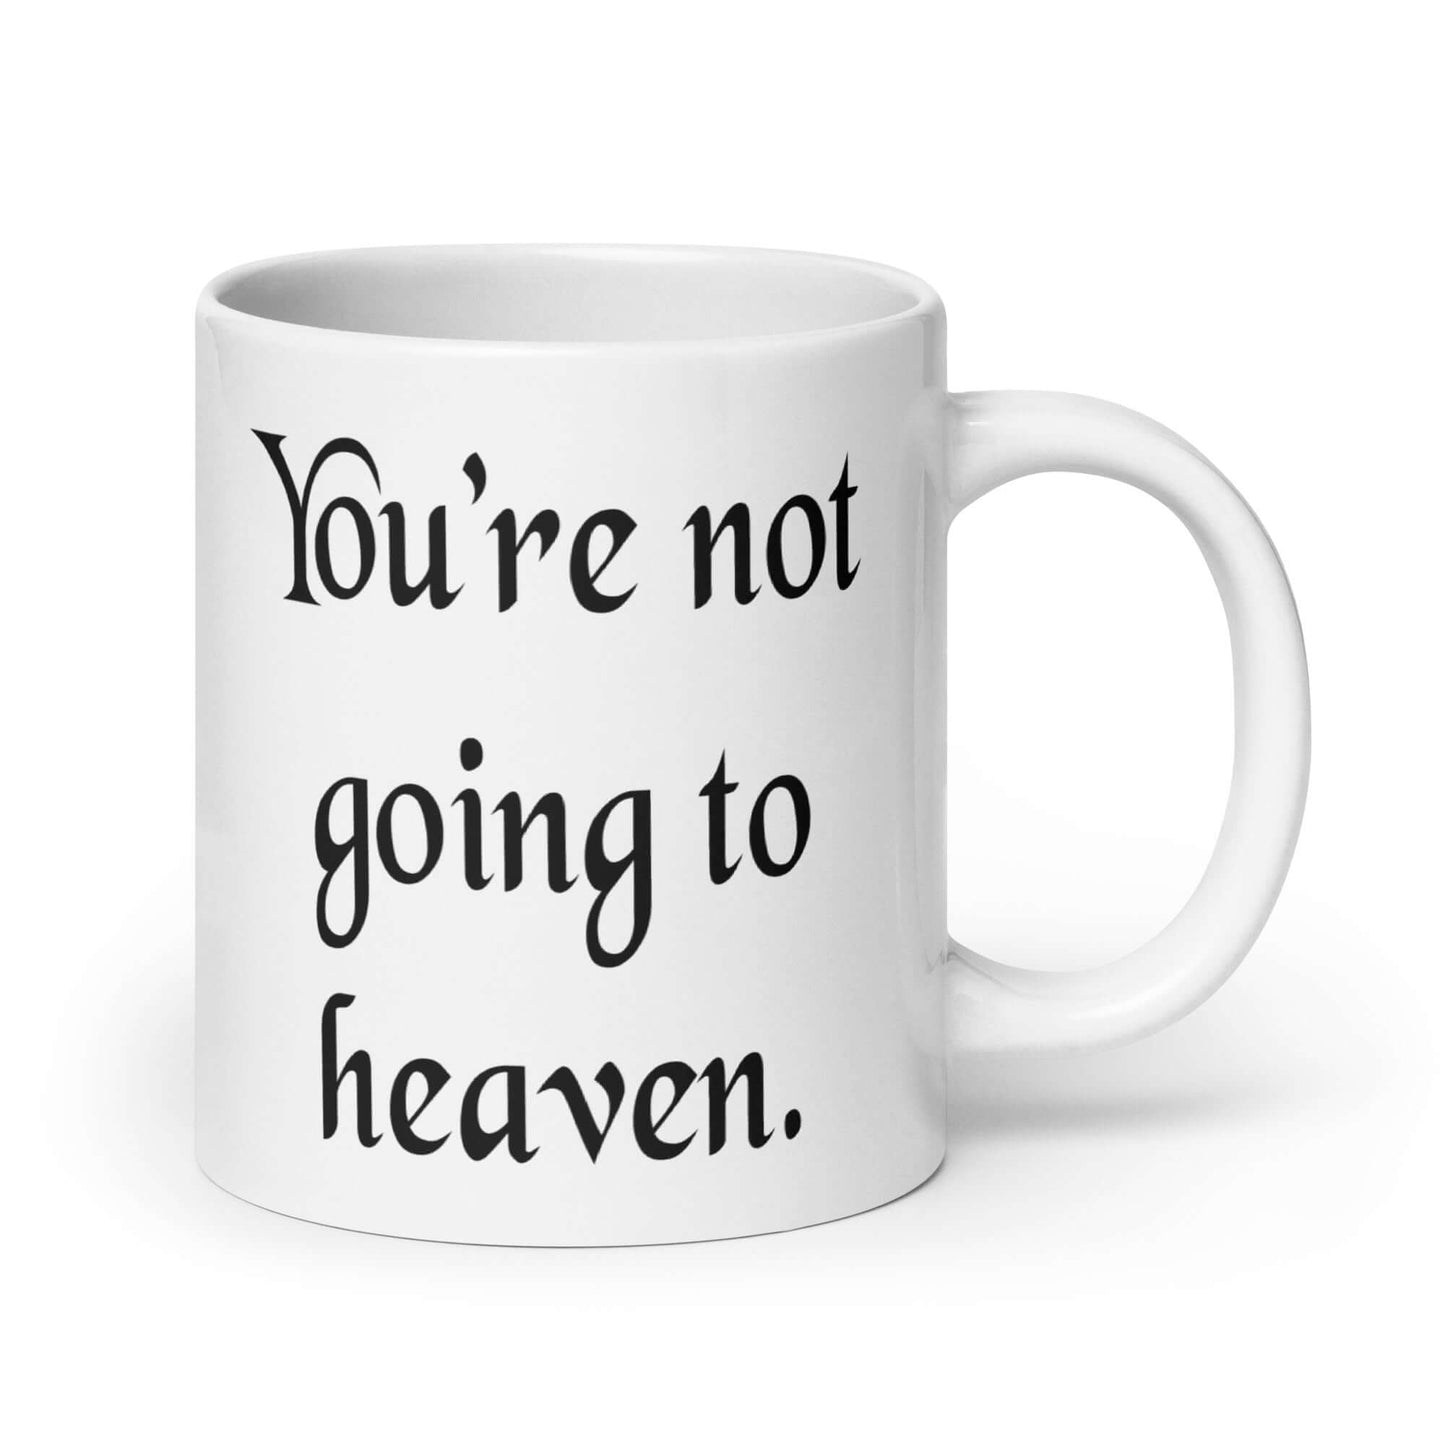 You're not going to heaven atheist sarcastic humor coffee mug. Snarky offensive religion joke gift.